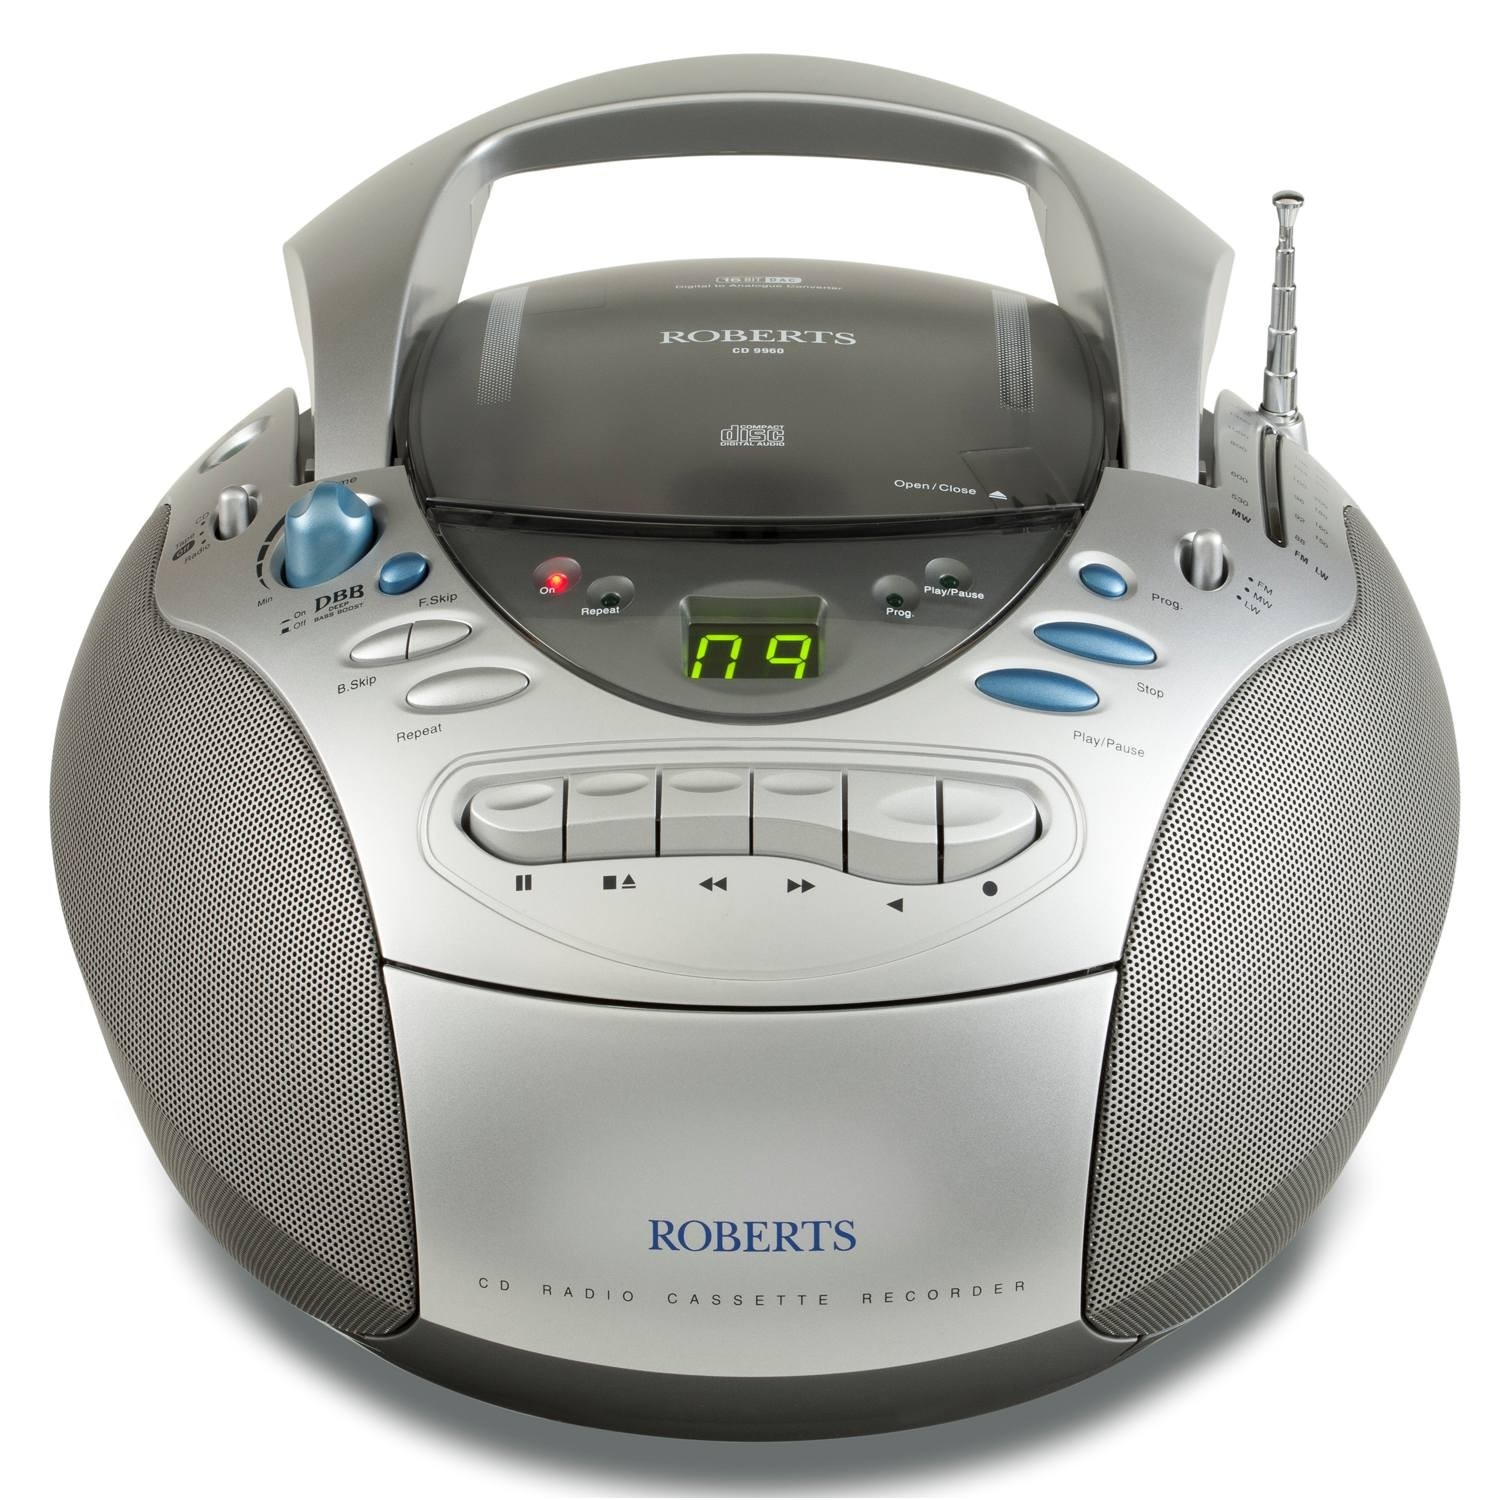 ROBERTS RADIO WITH CD AND CASSETTE PLAYER - Baileys Electrical